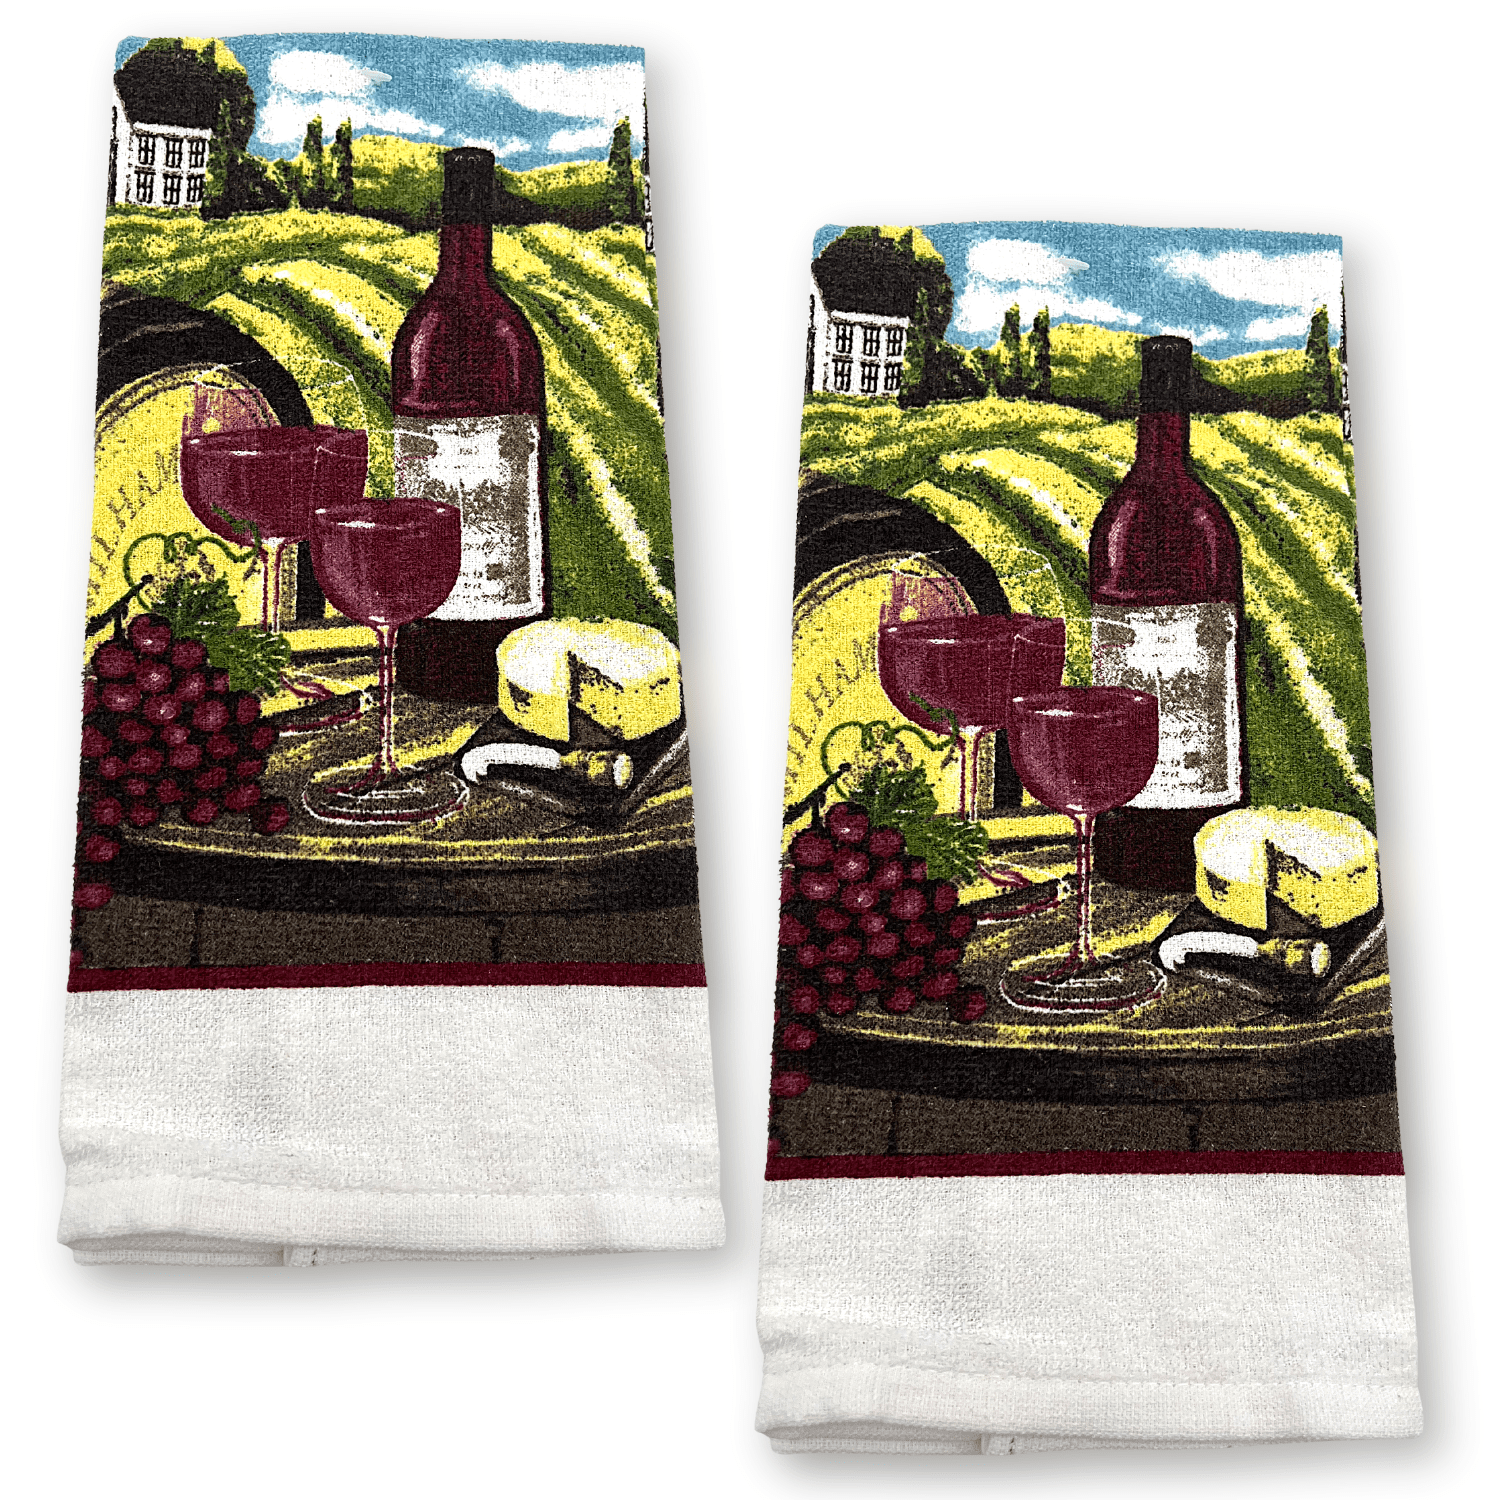 WINE DRINKS WELL WITH OTHERS,HW 18"x28" SET OF 2 DIFFERENT JUMBO KITCHEN TOWELS 